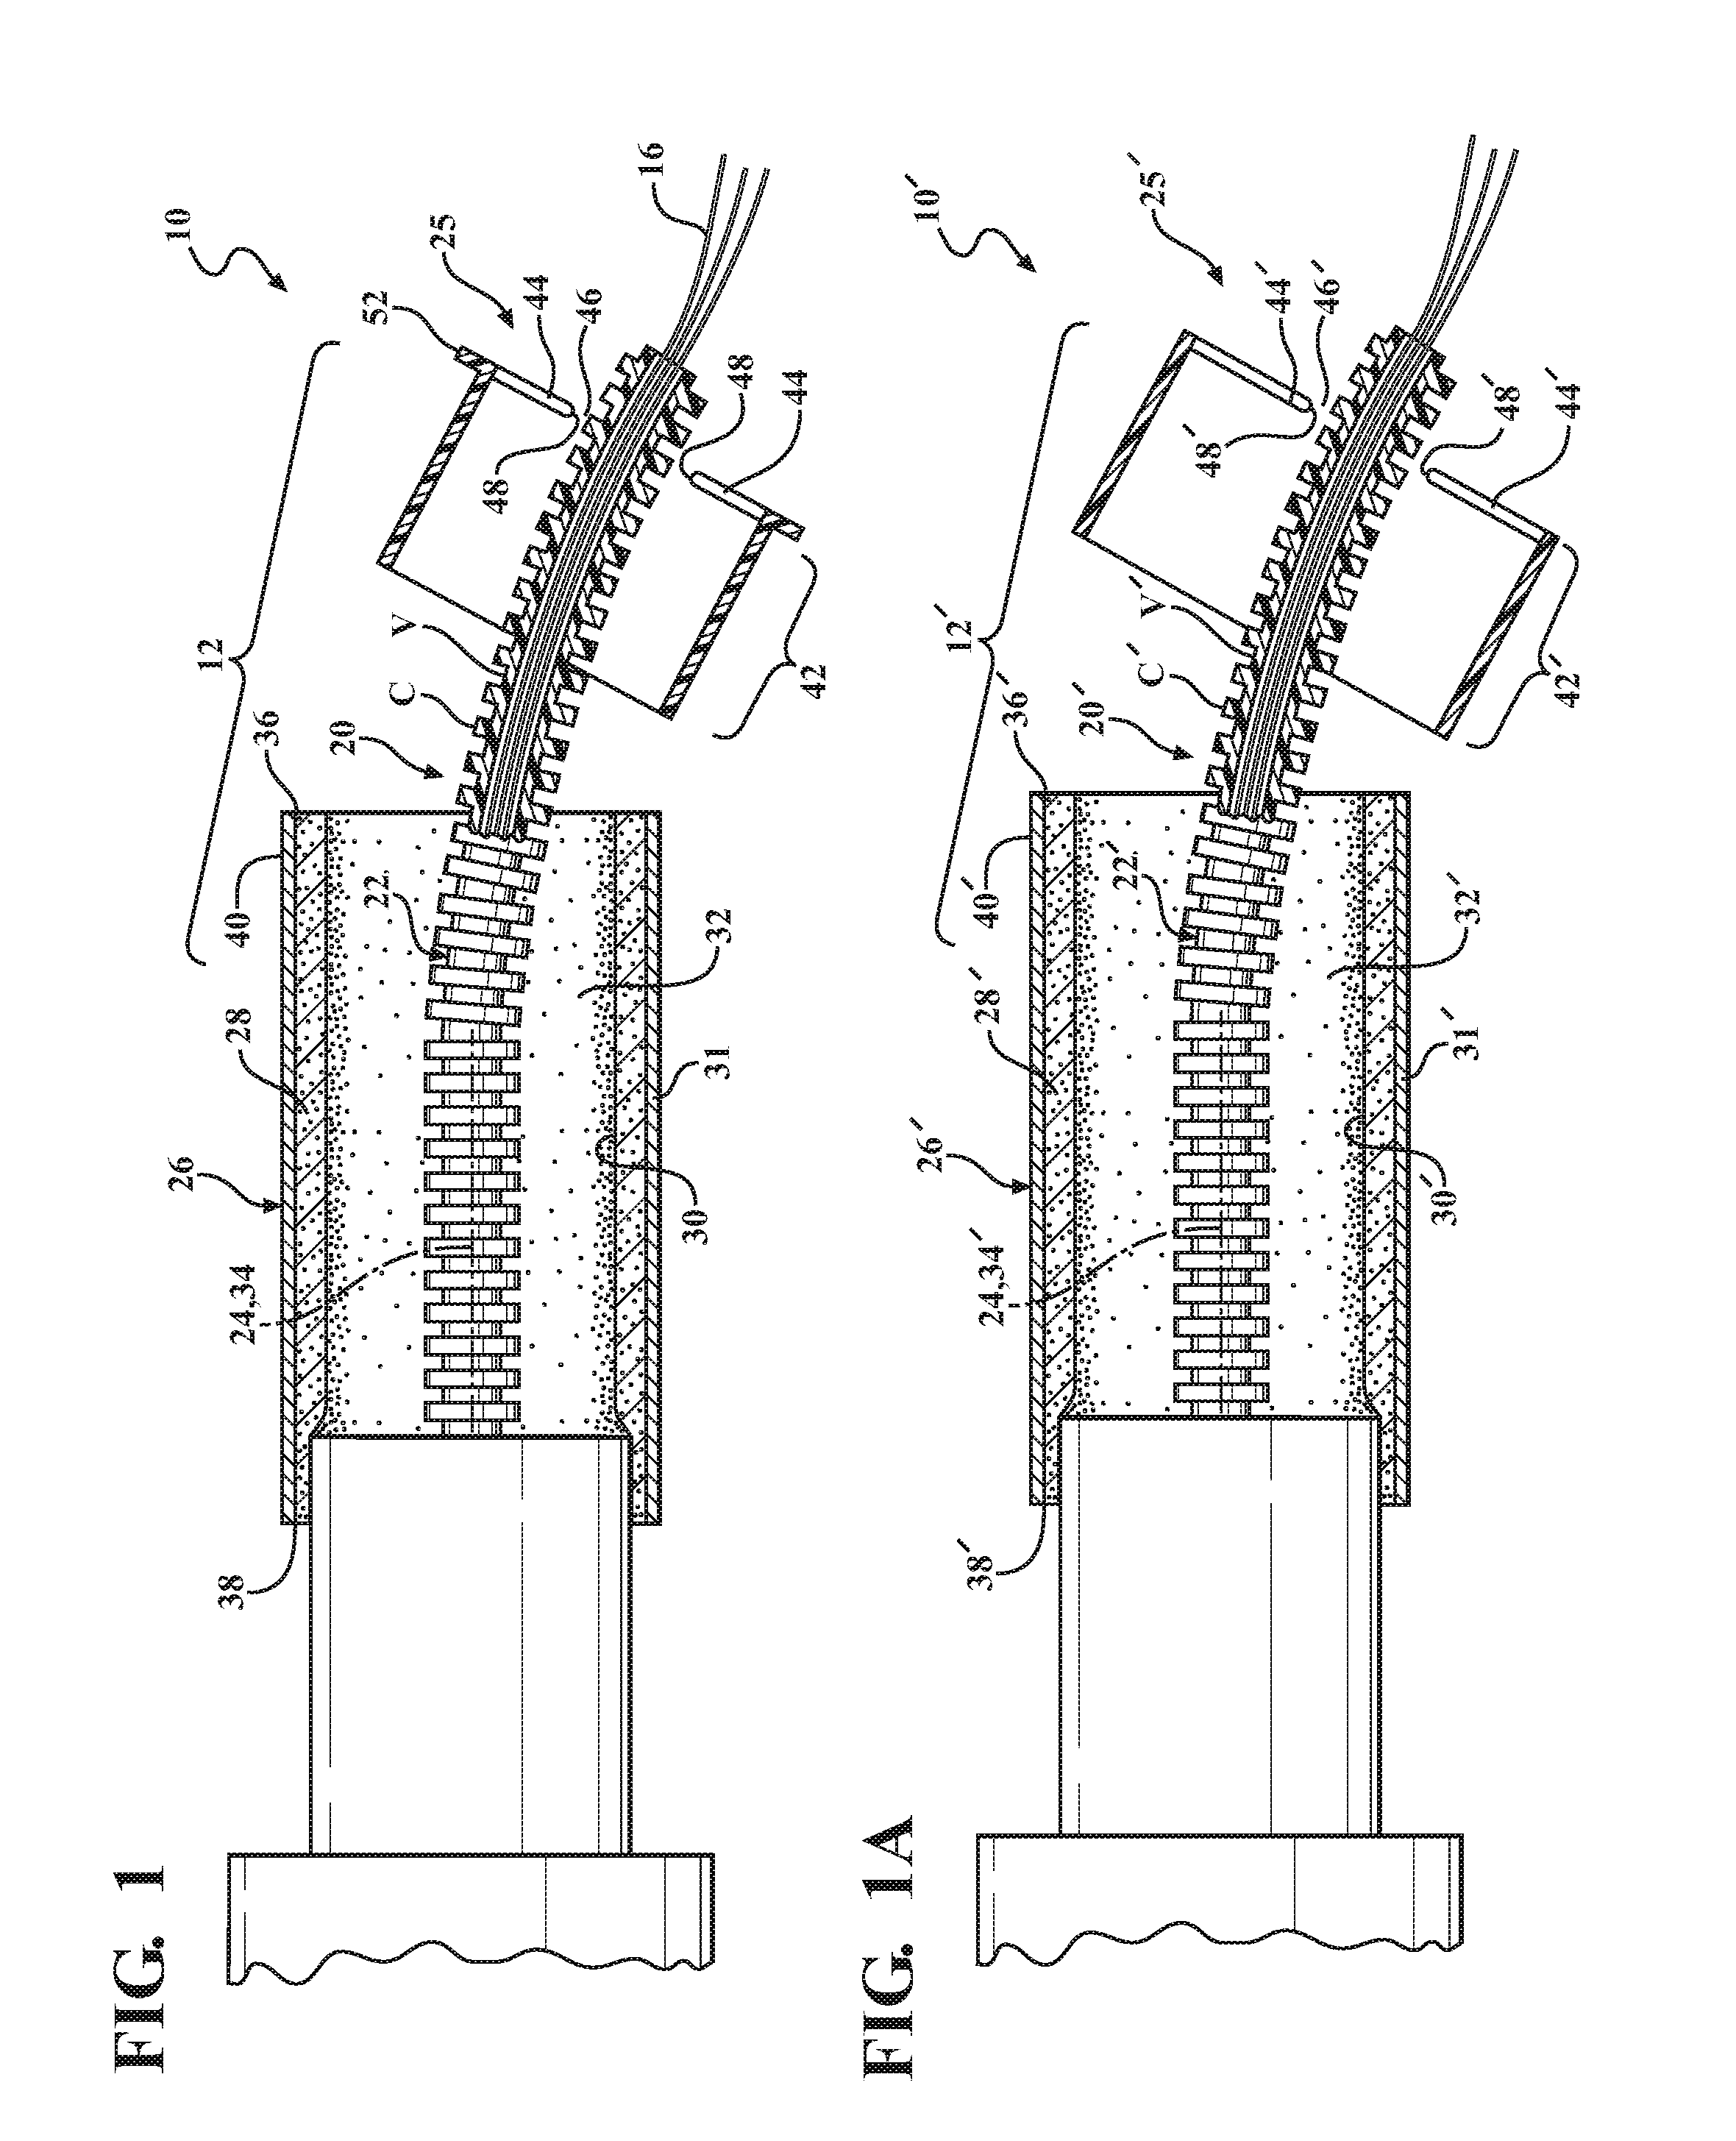 Thermal sleeve with self-adjusting positioning member, assembly therewith and method protecting a temperature sensitive member therewith